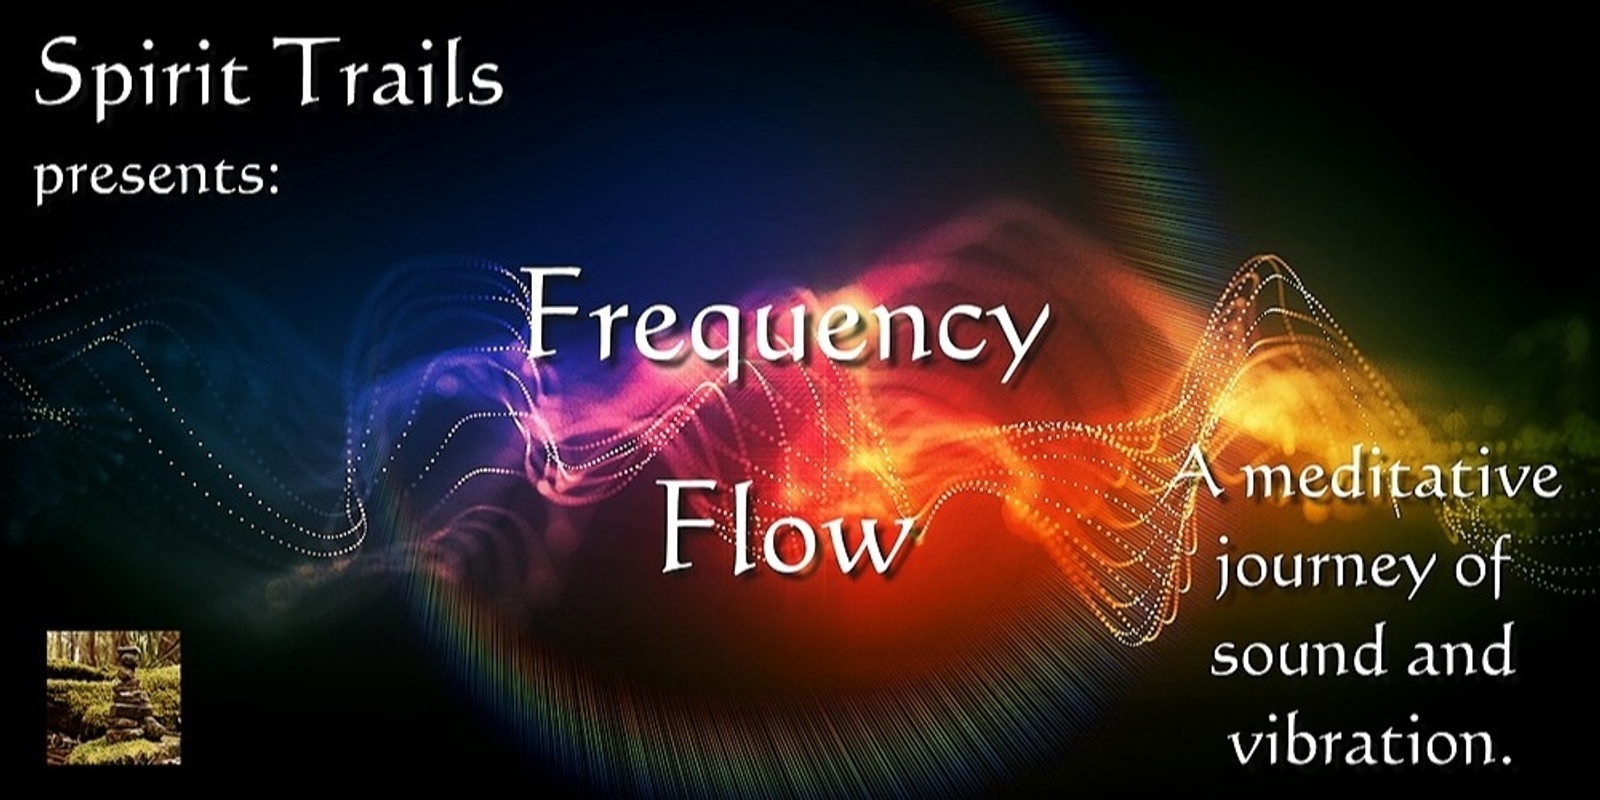 Frequency Flow